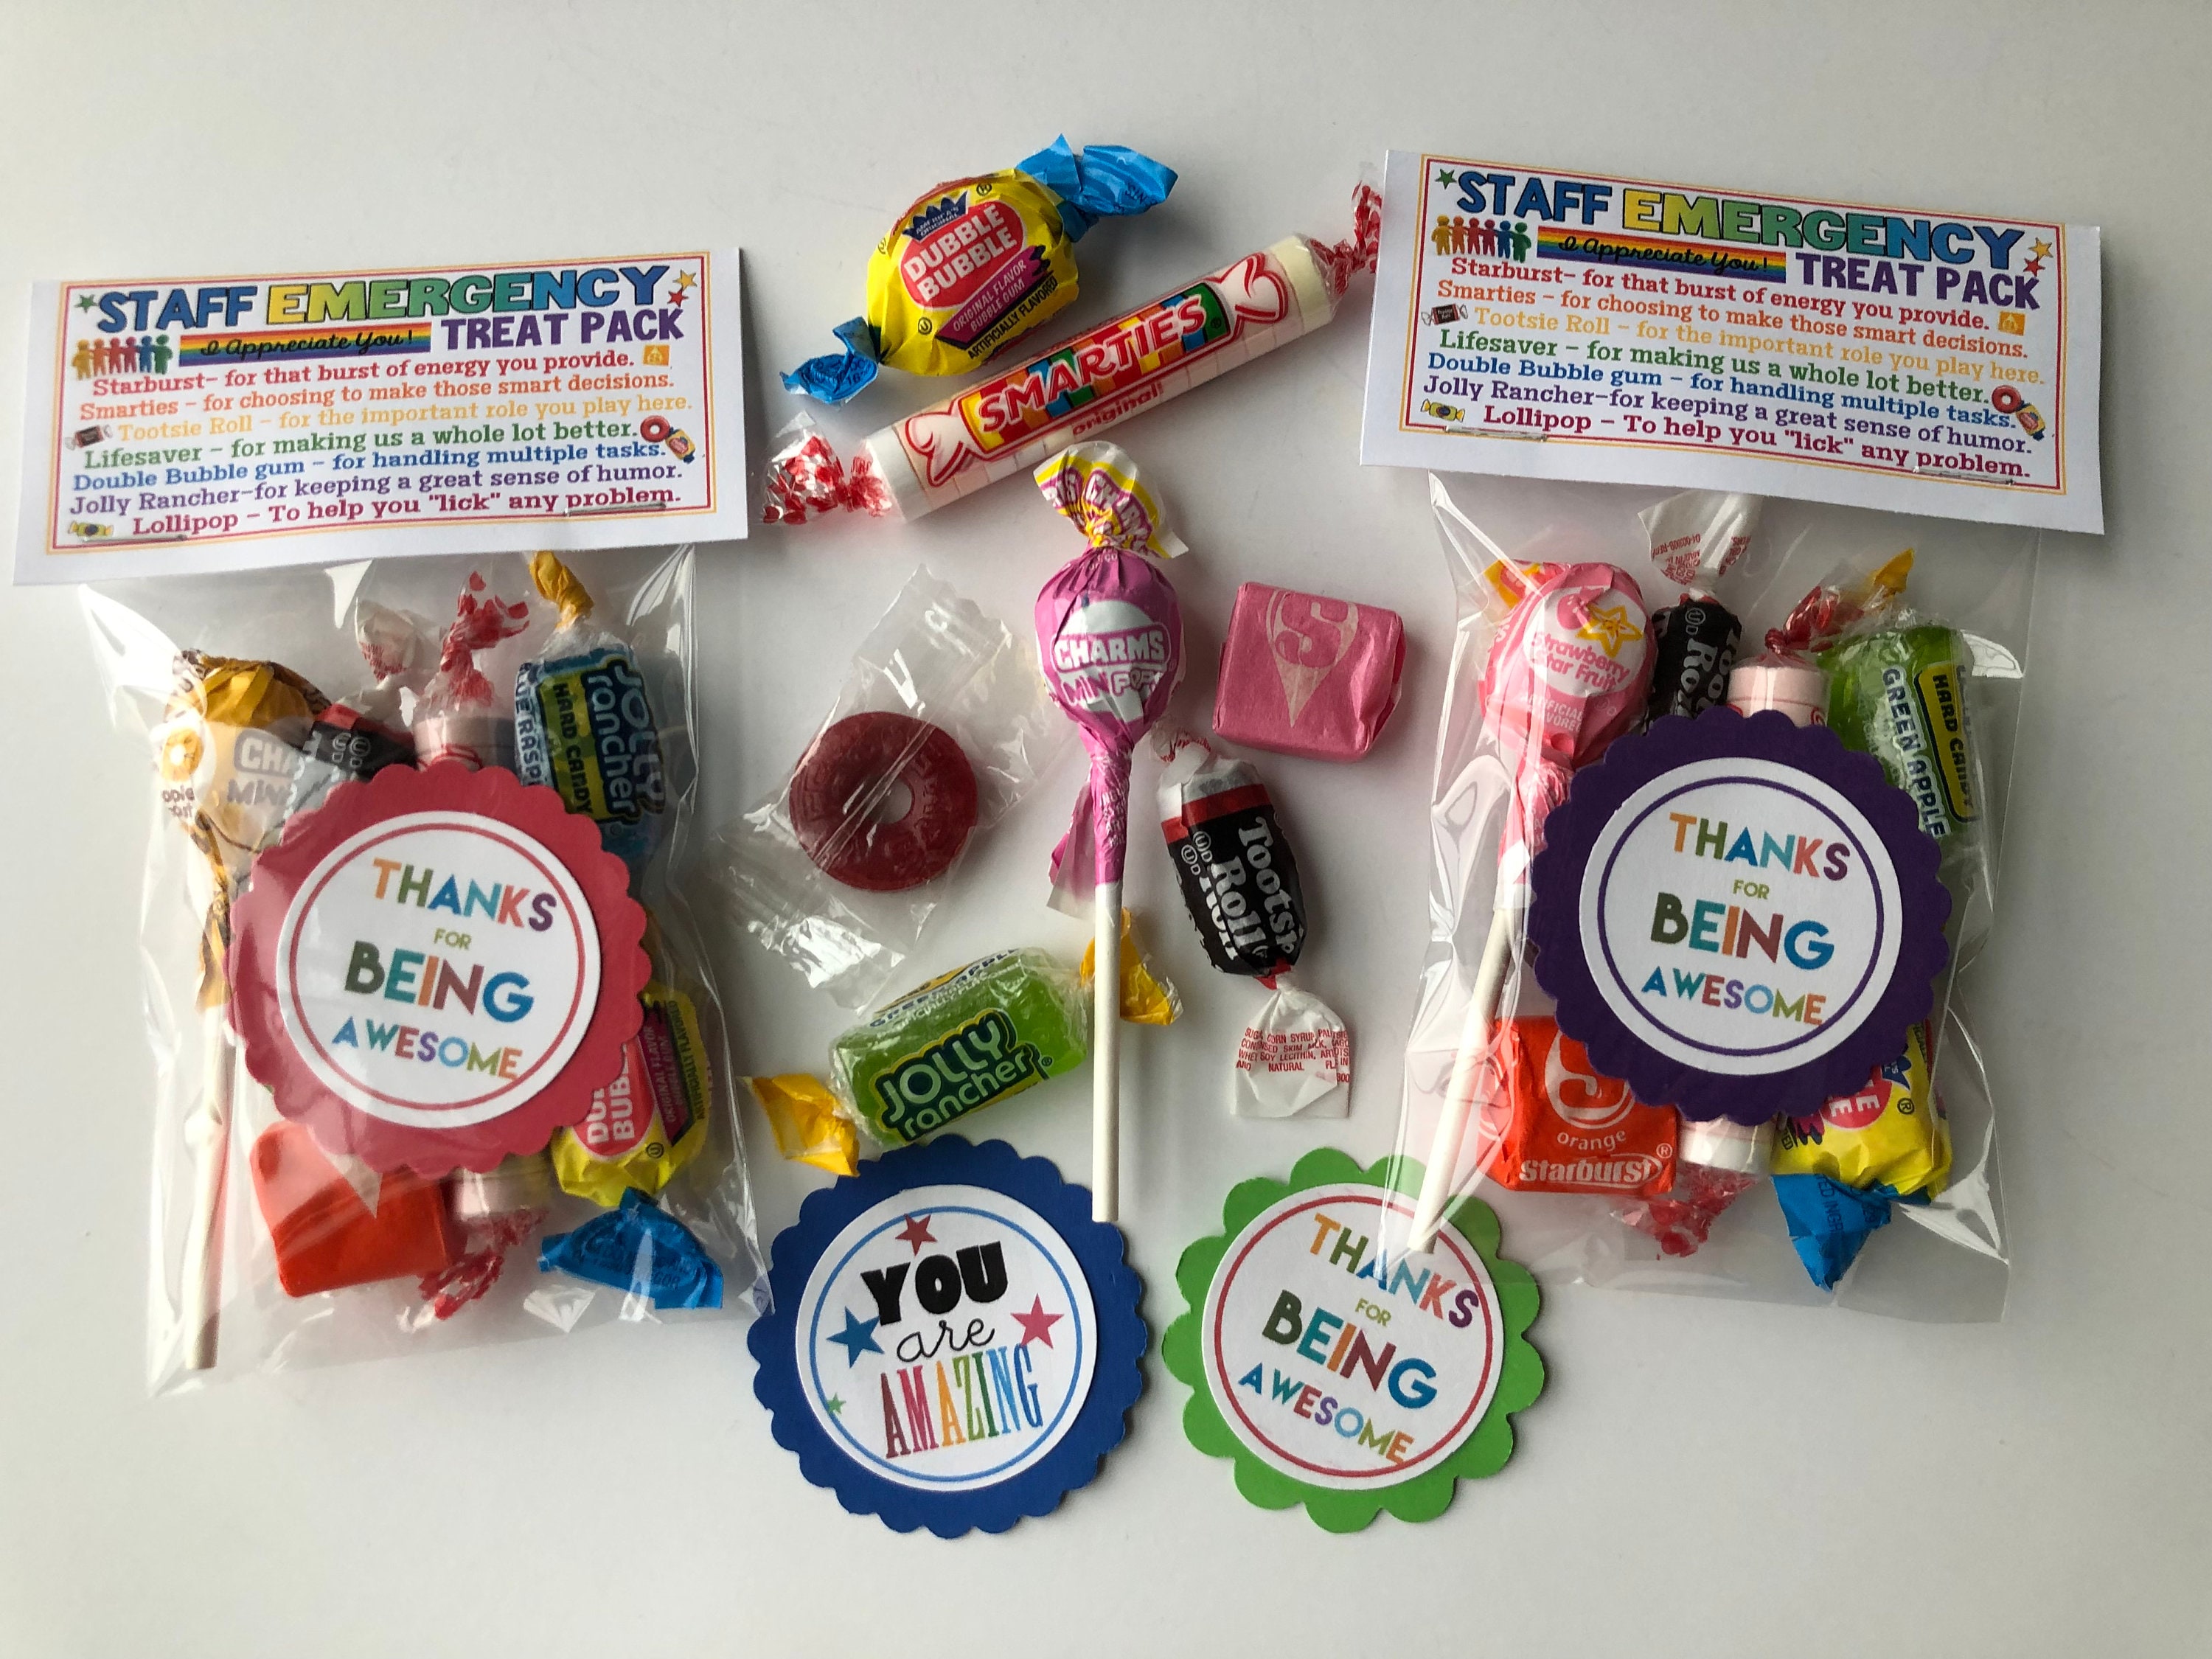 STAFF Emergency Treat Pack sweet Thoughts Goody Bag, Happy Birthday,  Friends, Co-workers, Secretary, Have a Great Day, Smile, Funny GAG Bag -   Sweden